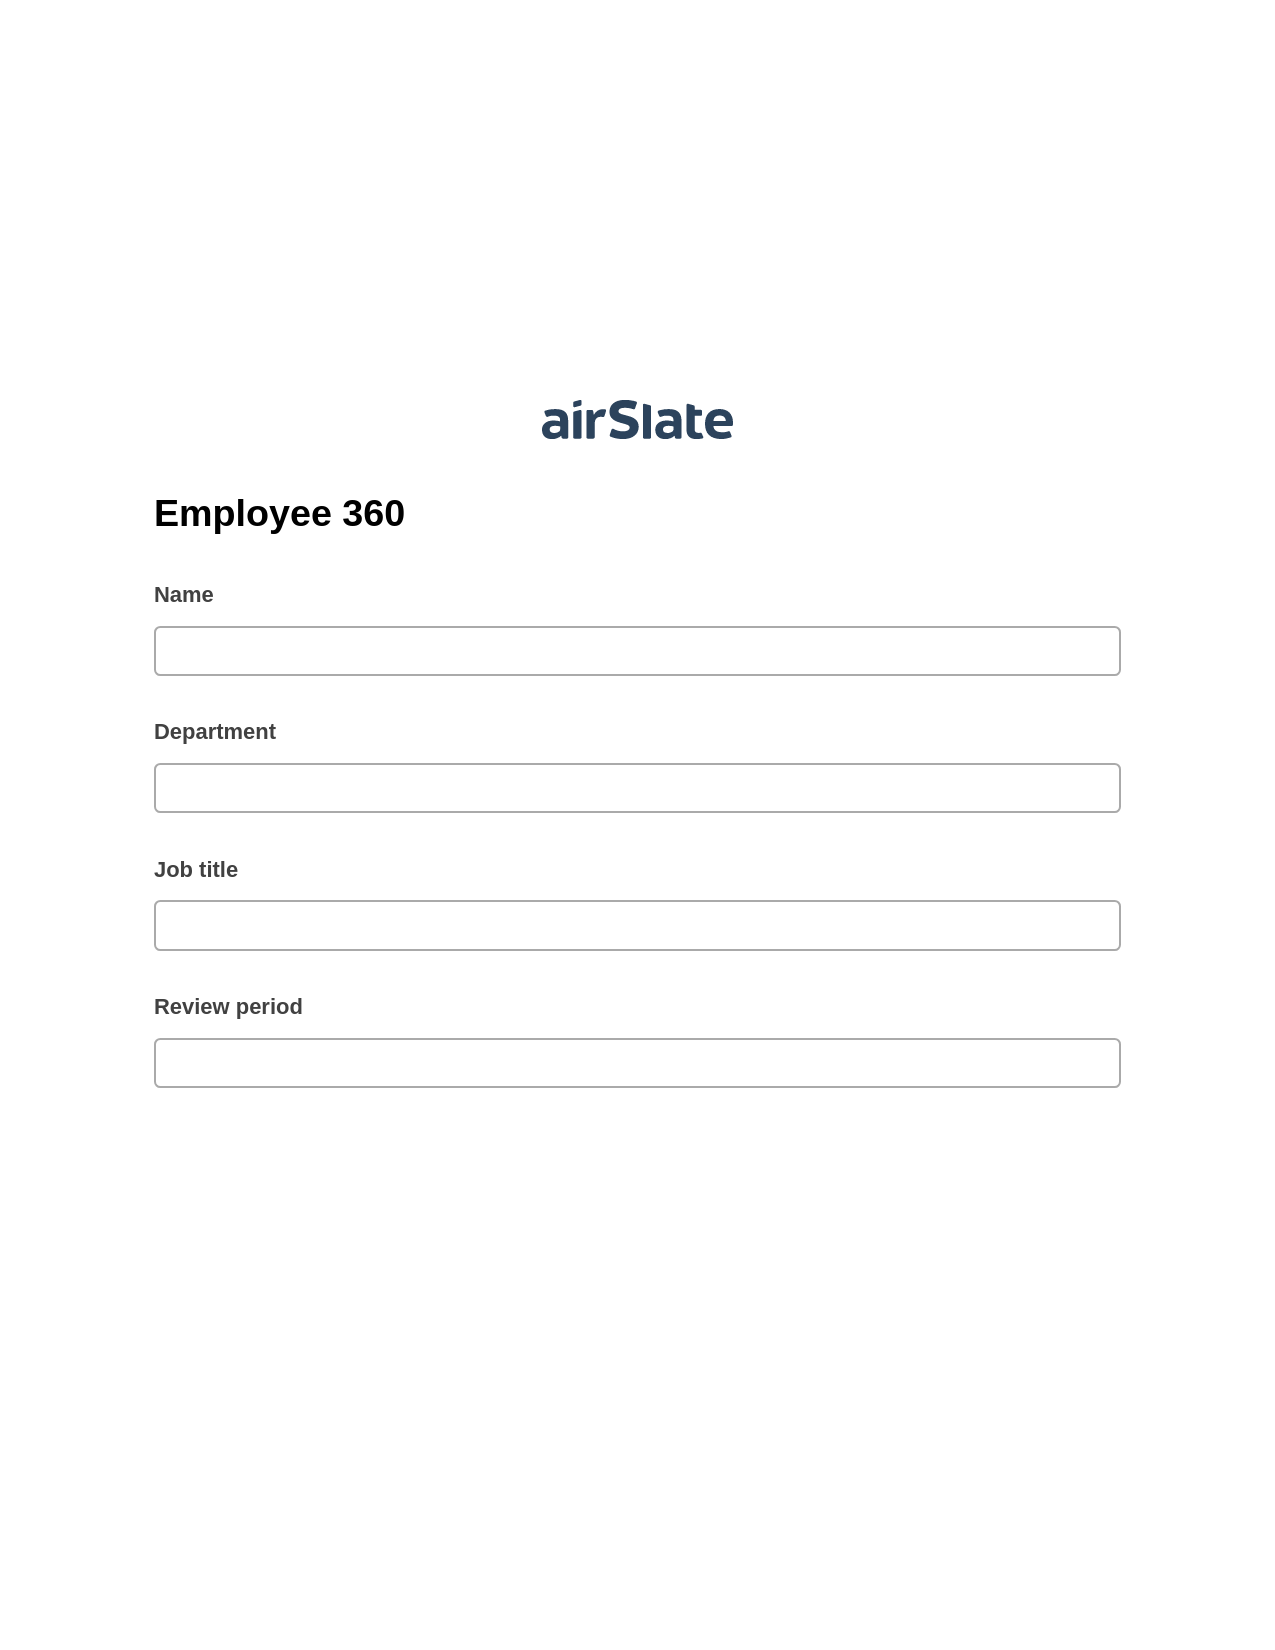 Employee 360 Prefill from NetSuite records, Google Cloud Print Bot, Archive to OneDrive Bot